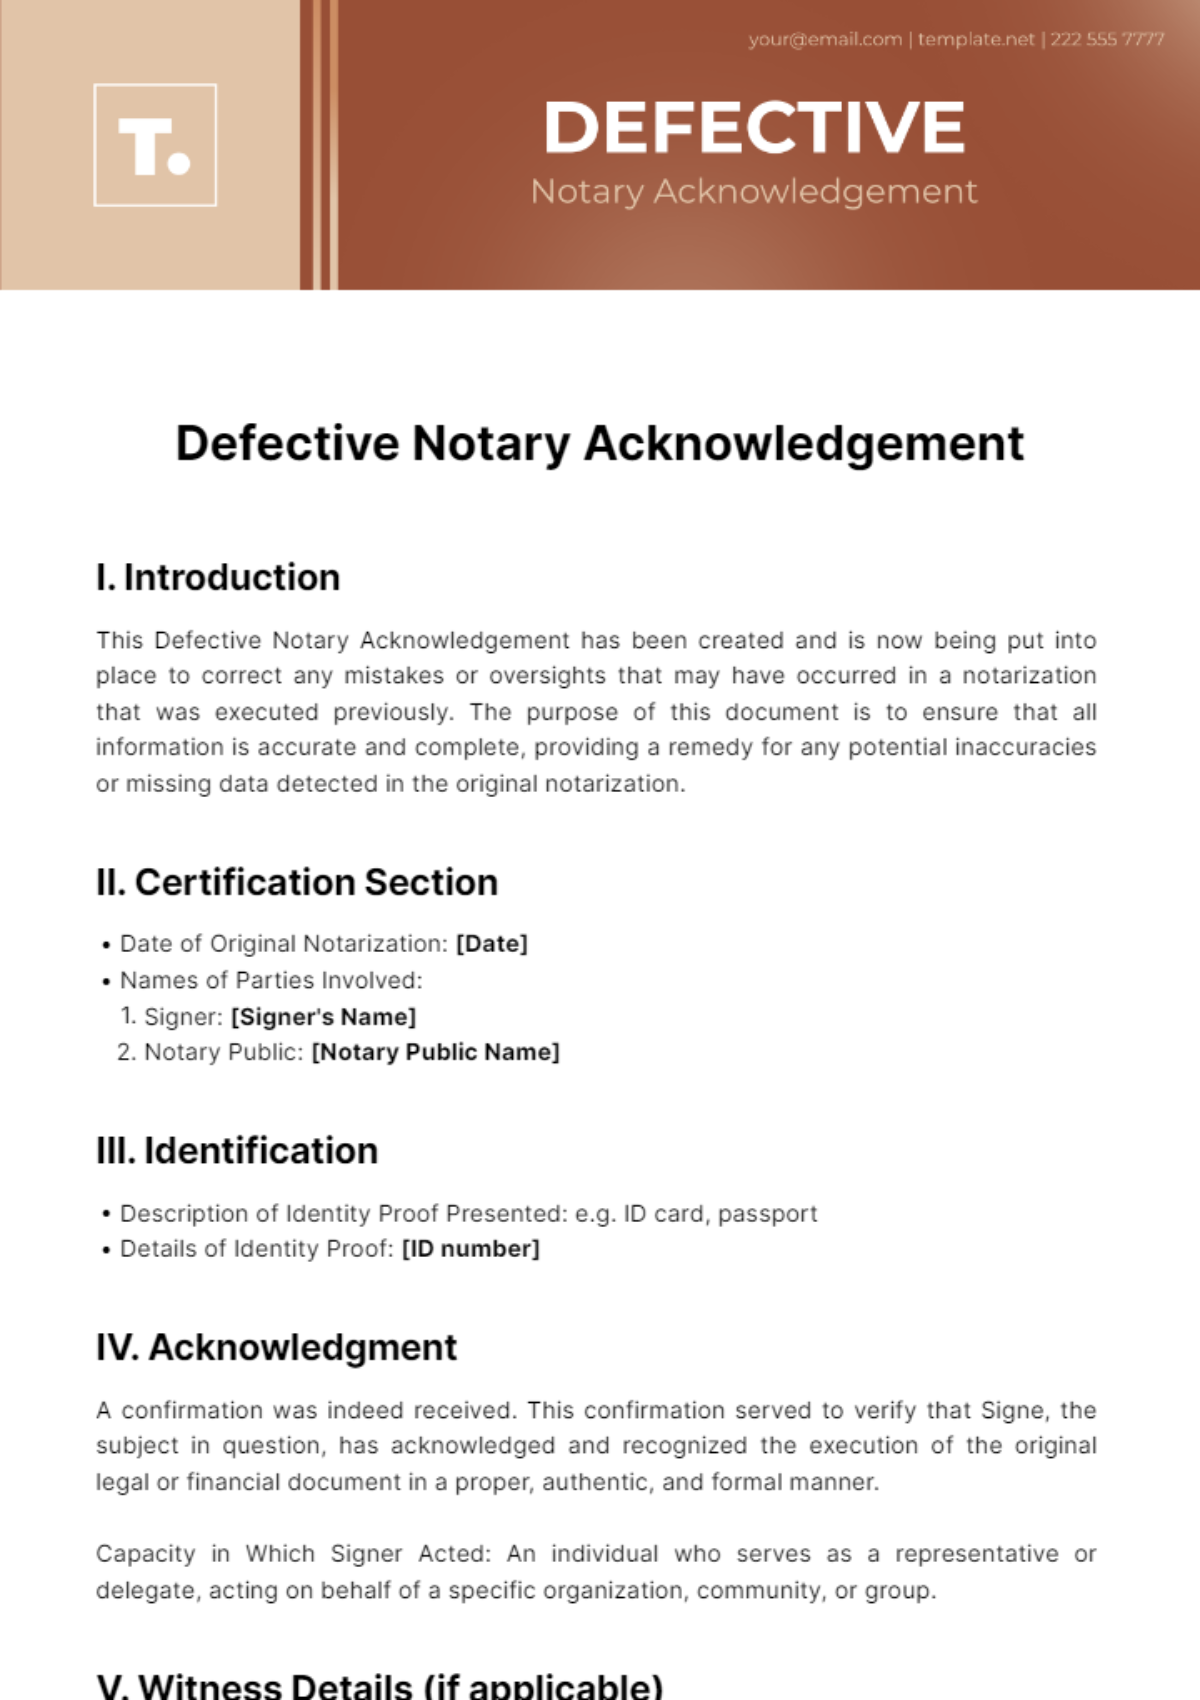 Defective Notary Acknowledgement Template